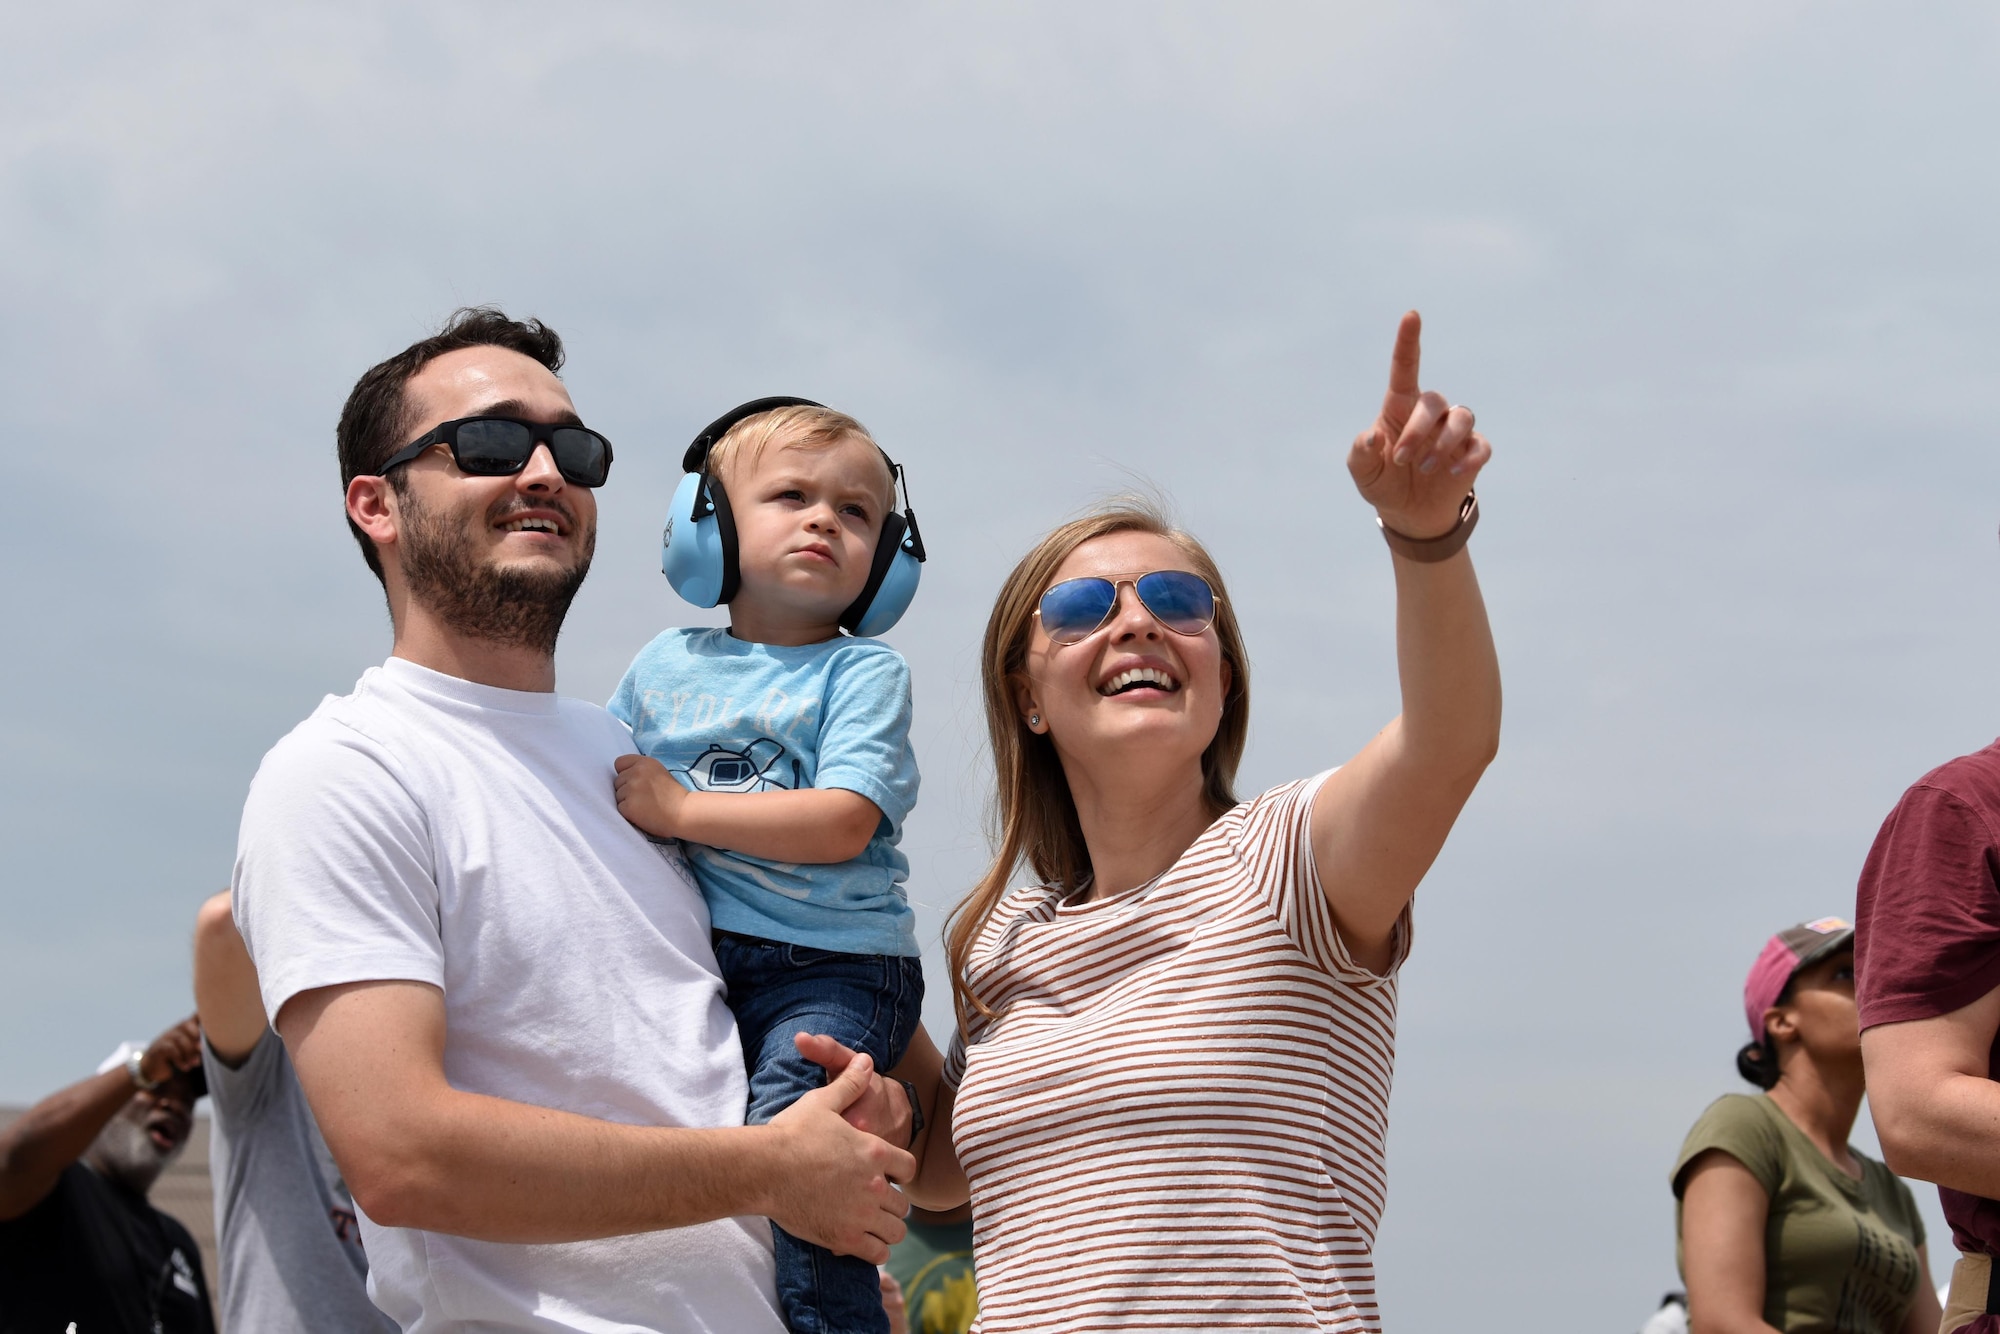 A family watches the United States Air Force Thunderbirds during the Joint Base Andrews 2019 Air and Space Expo at Joint Base Andrews, Maryland, May 11, 2019. The MQ-9 Reaper was a static display at this year’s show celebrating legends in flight. (U.S. Air Force photo by Capt. Annabel Monroe)